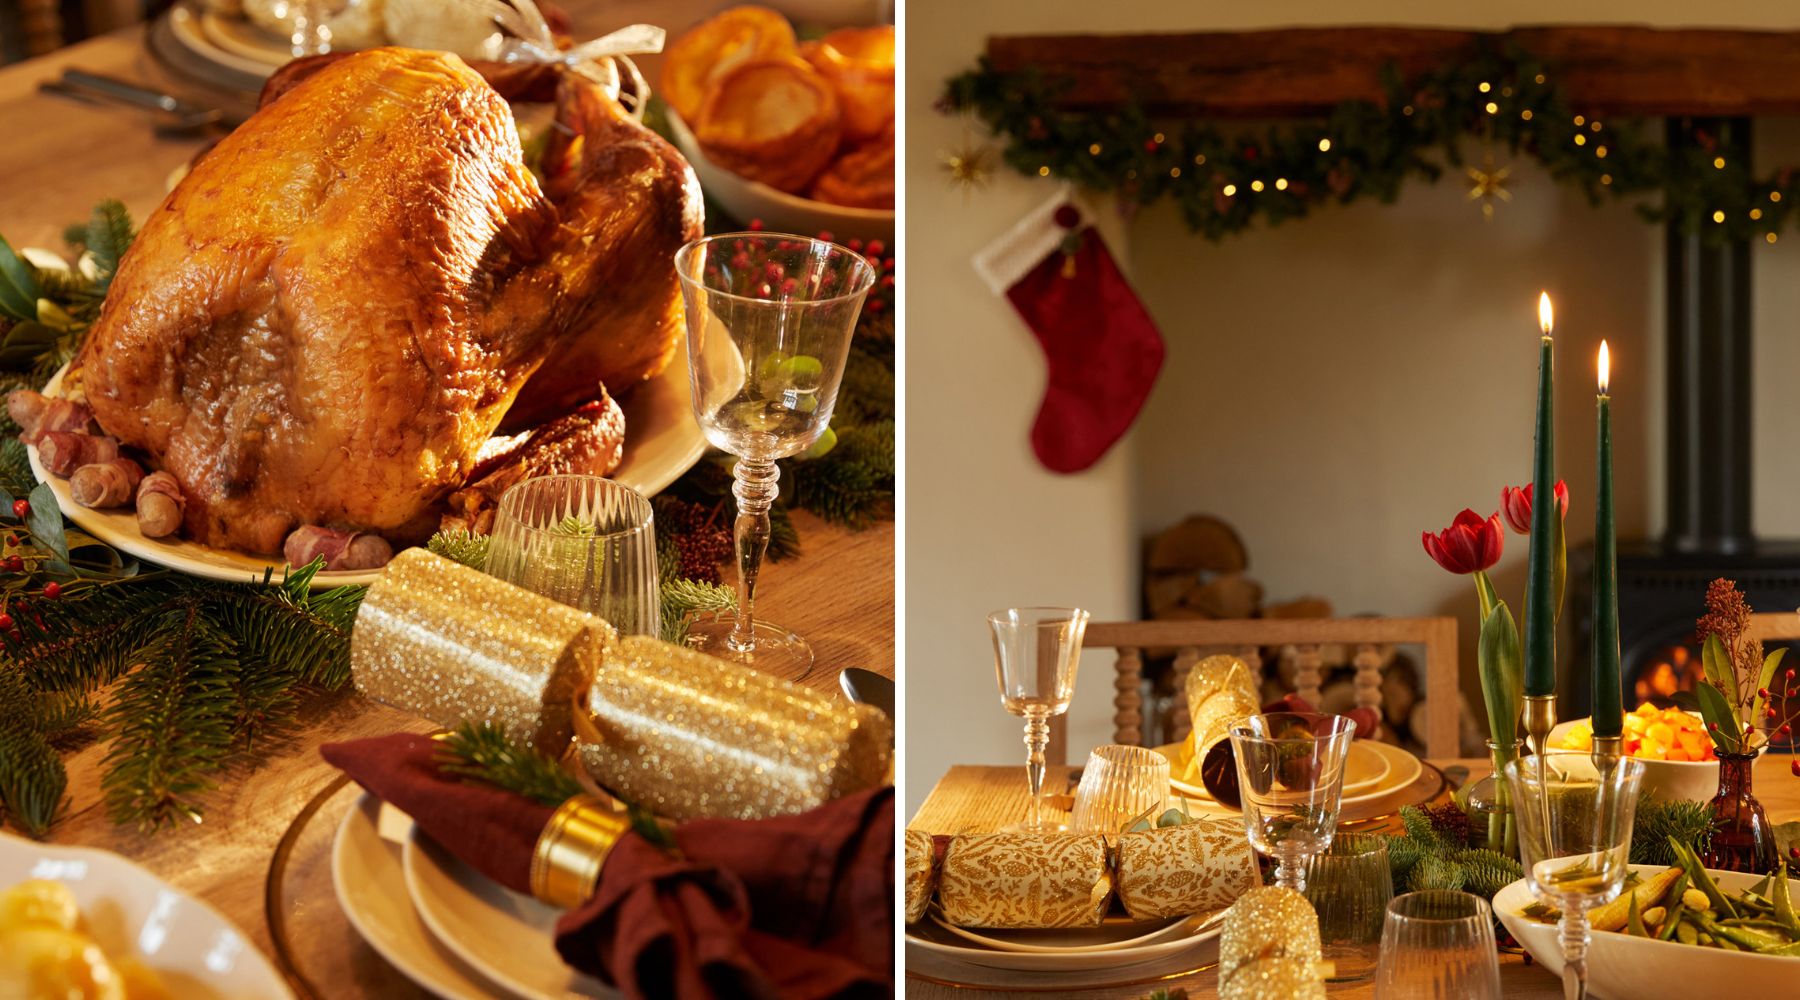 Omaze Million Pound House - Lake District. Turkey on the Christmas dinner table with gold crackers, green candles and glasses 